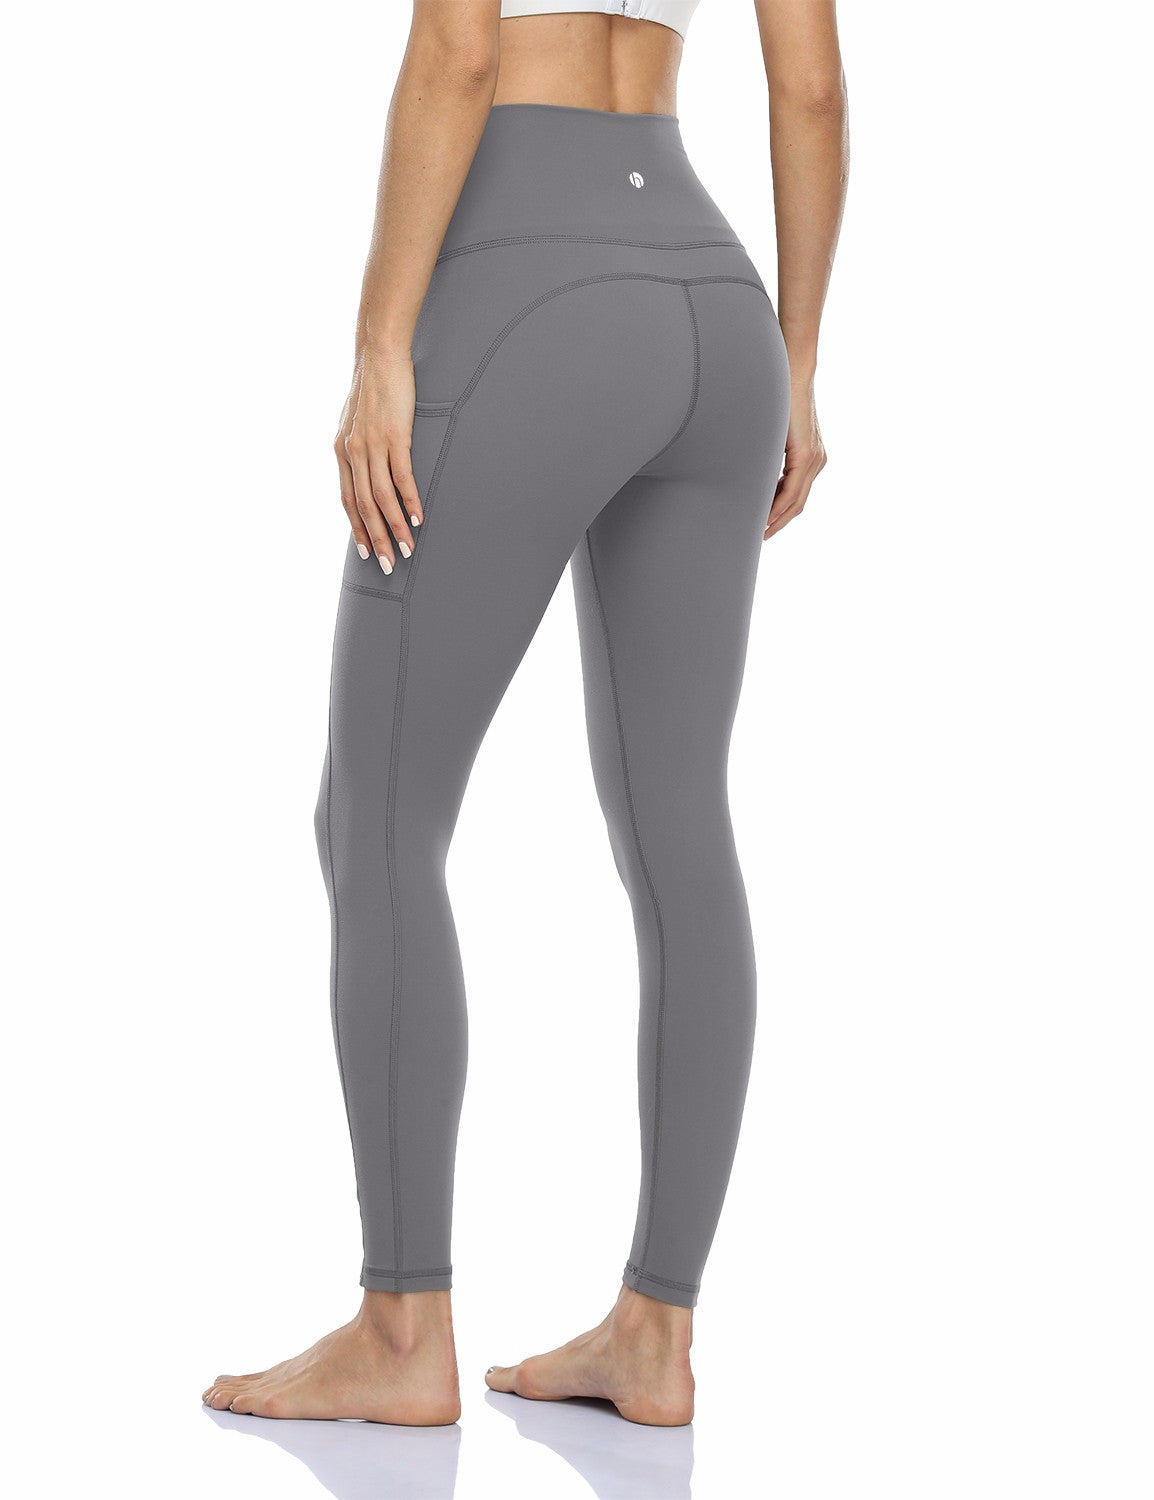 HeyNuts Essential 78 Leggings with Side Pockets for Nepal